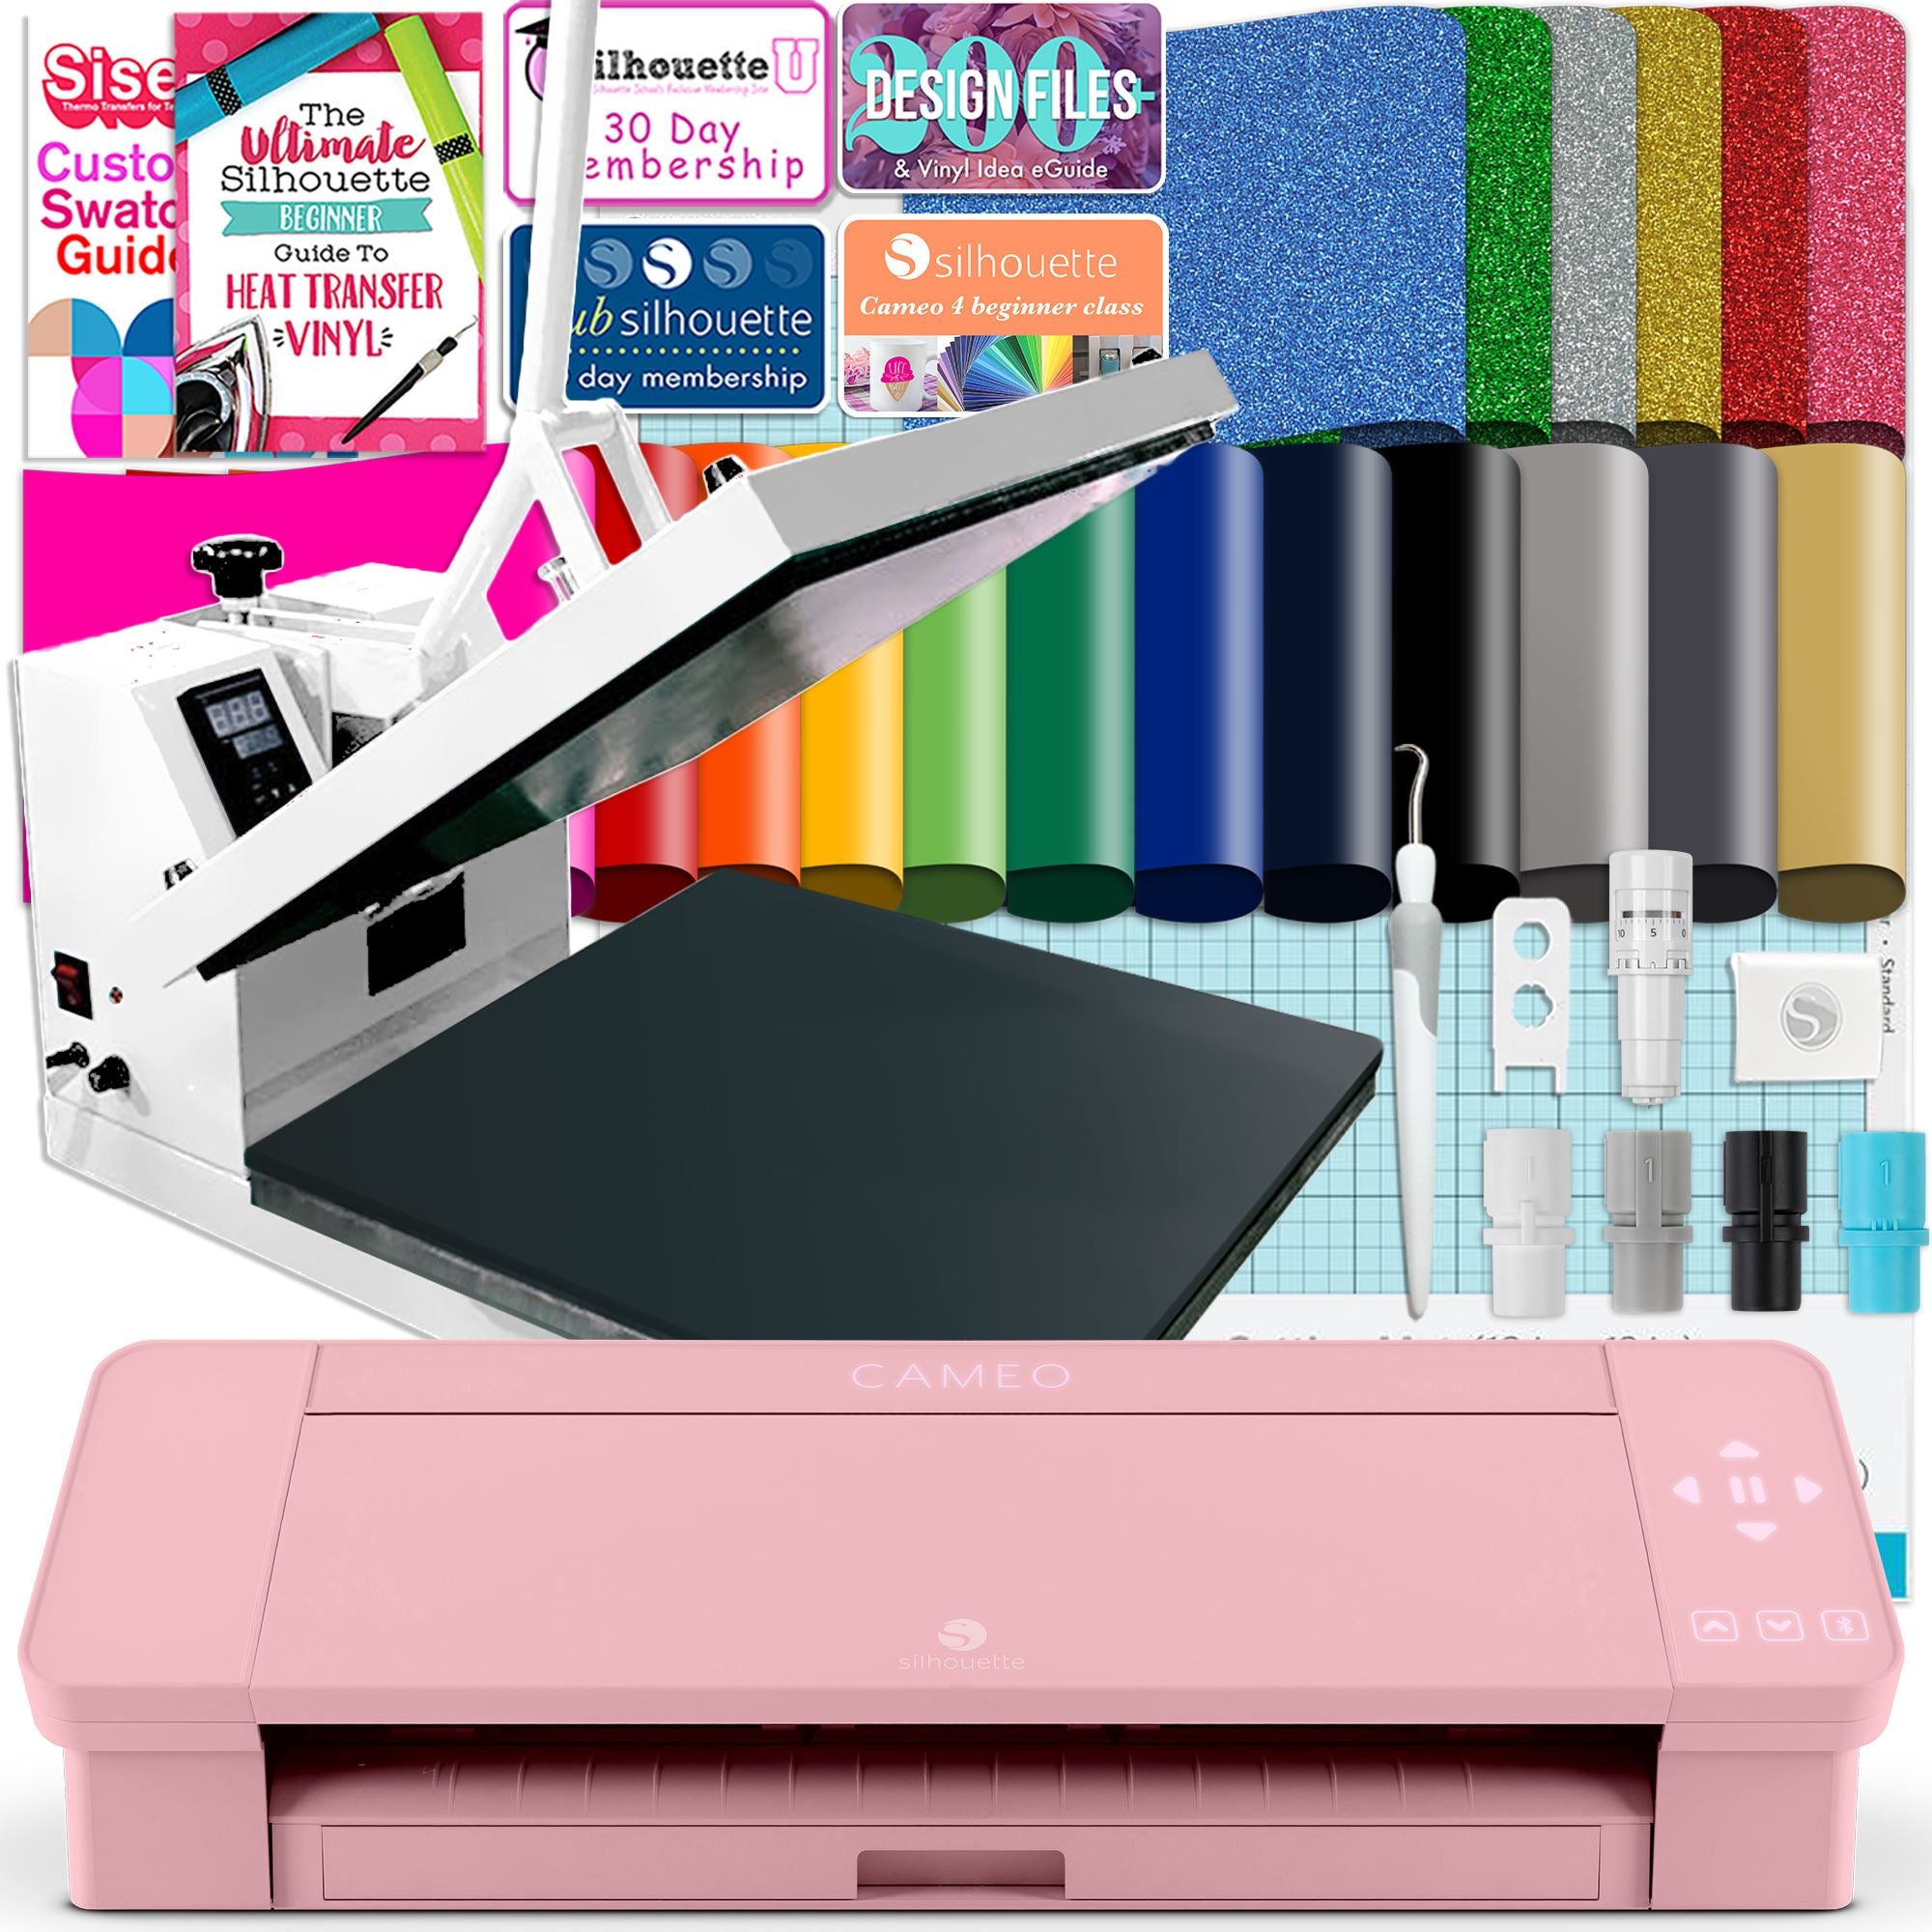 260 Silhouette CAMEO Bundles and Accessories ideas